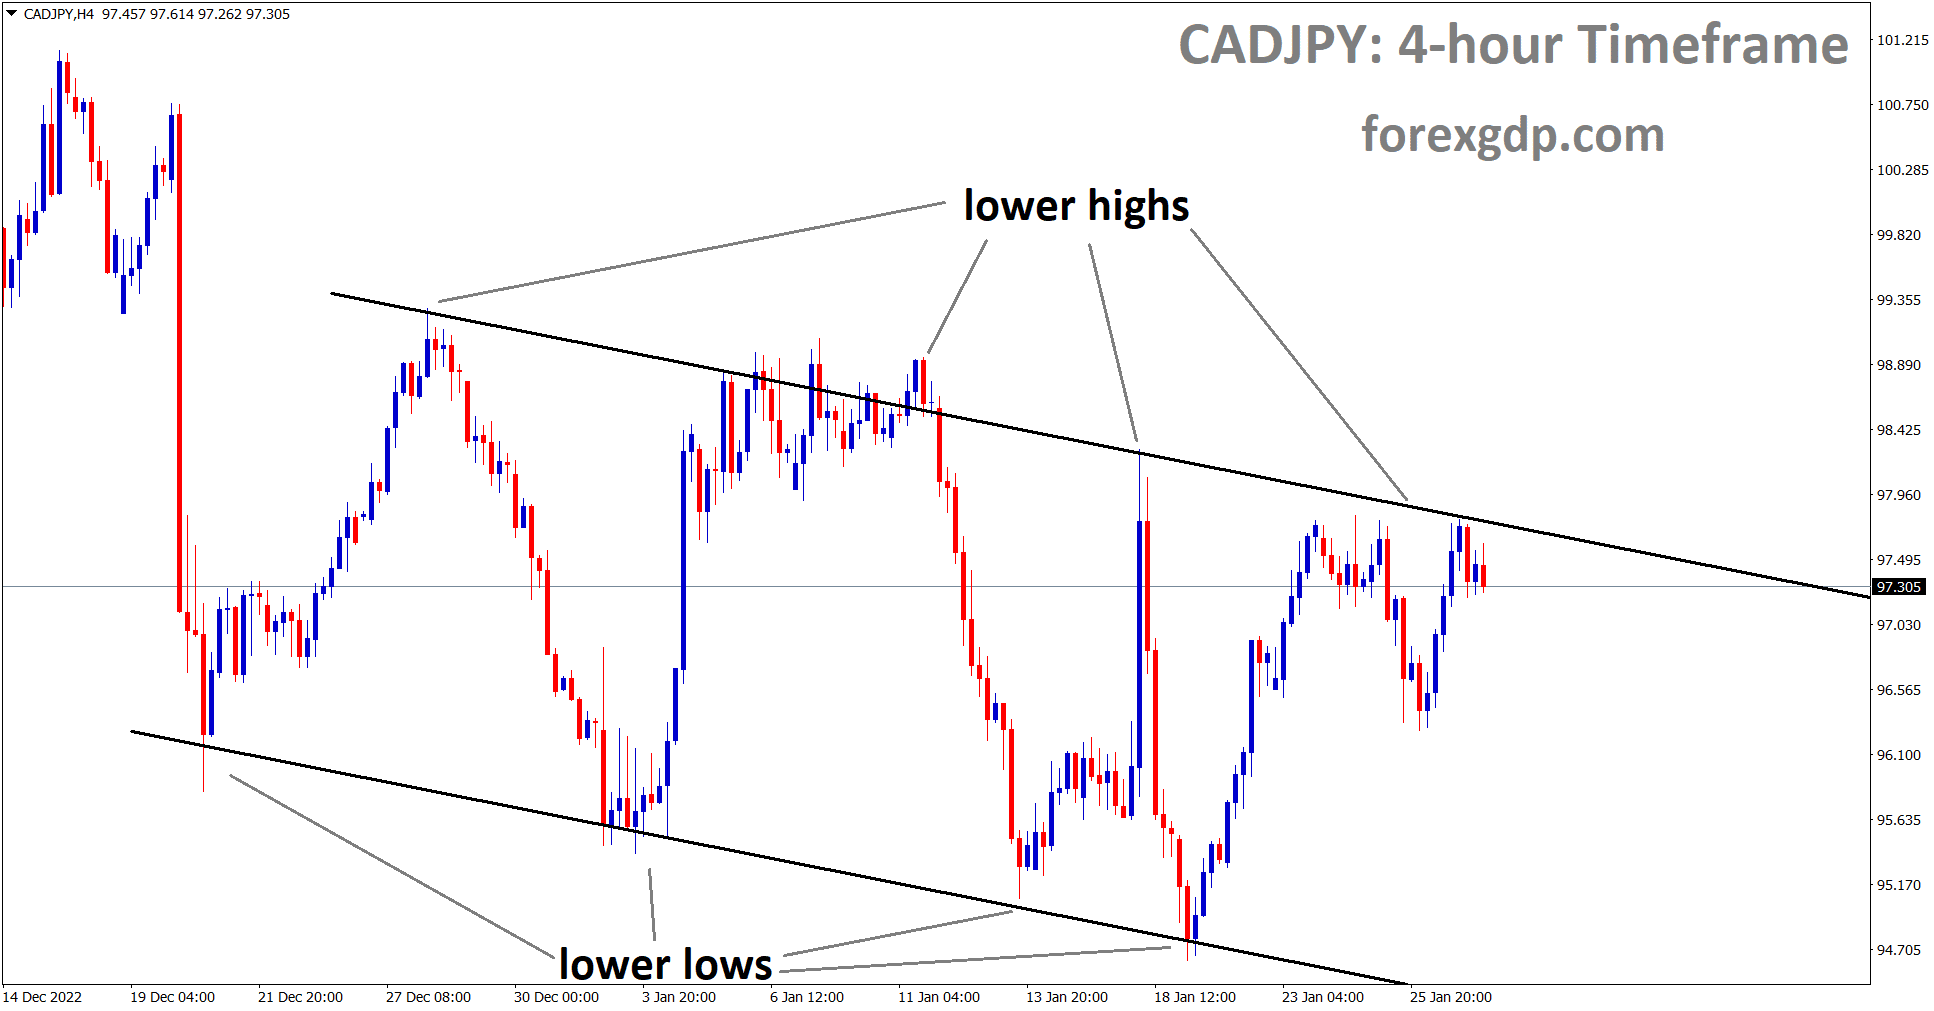 CADJPY is moving in a Descending channel and the market has reached the lower high area of the channel.